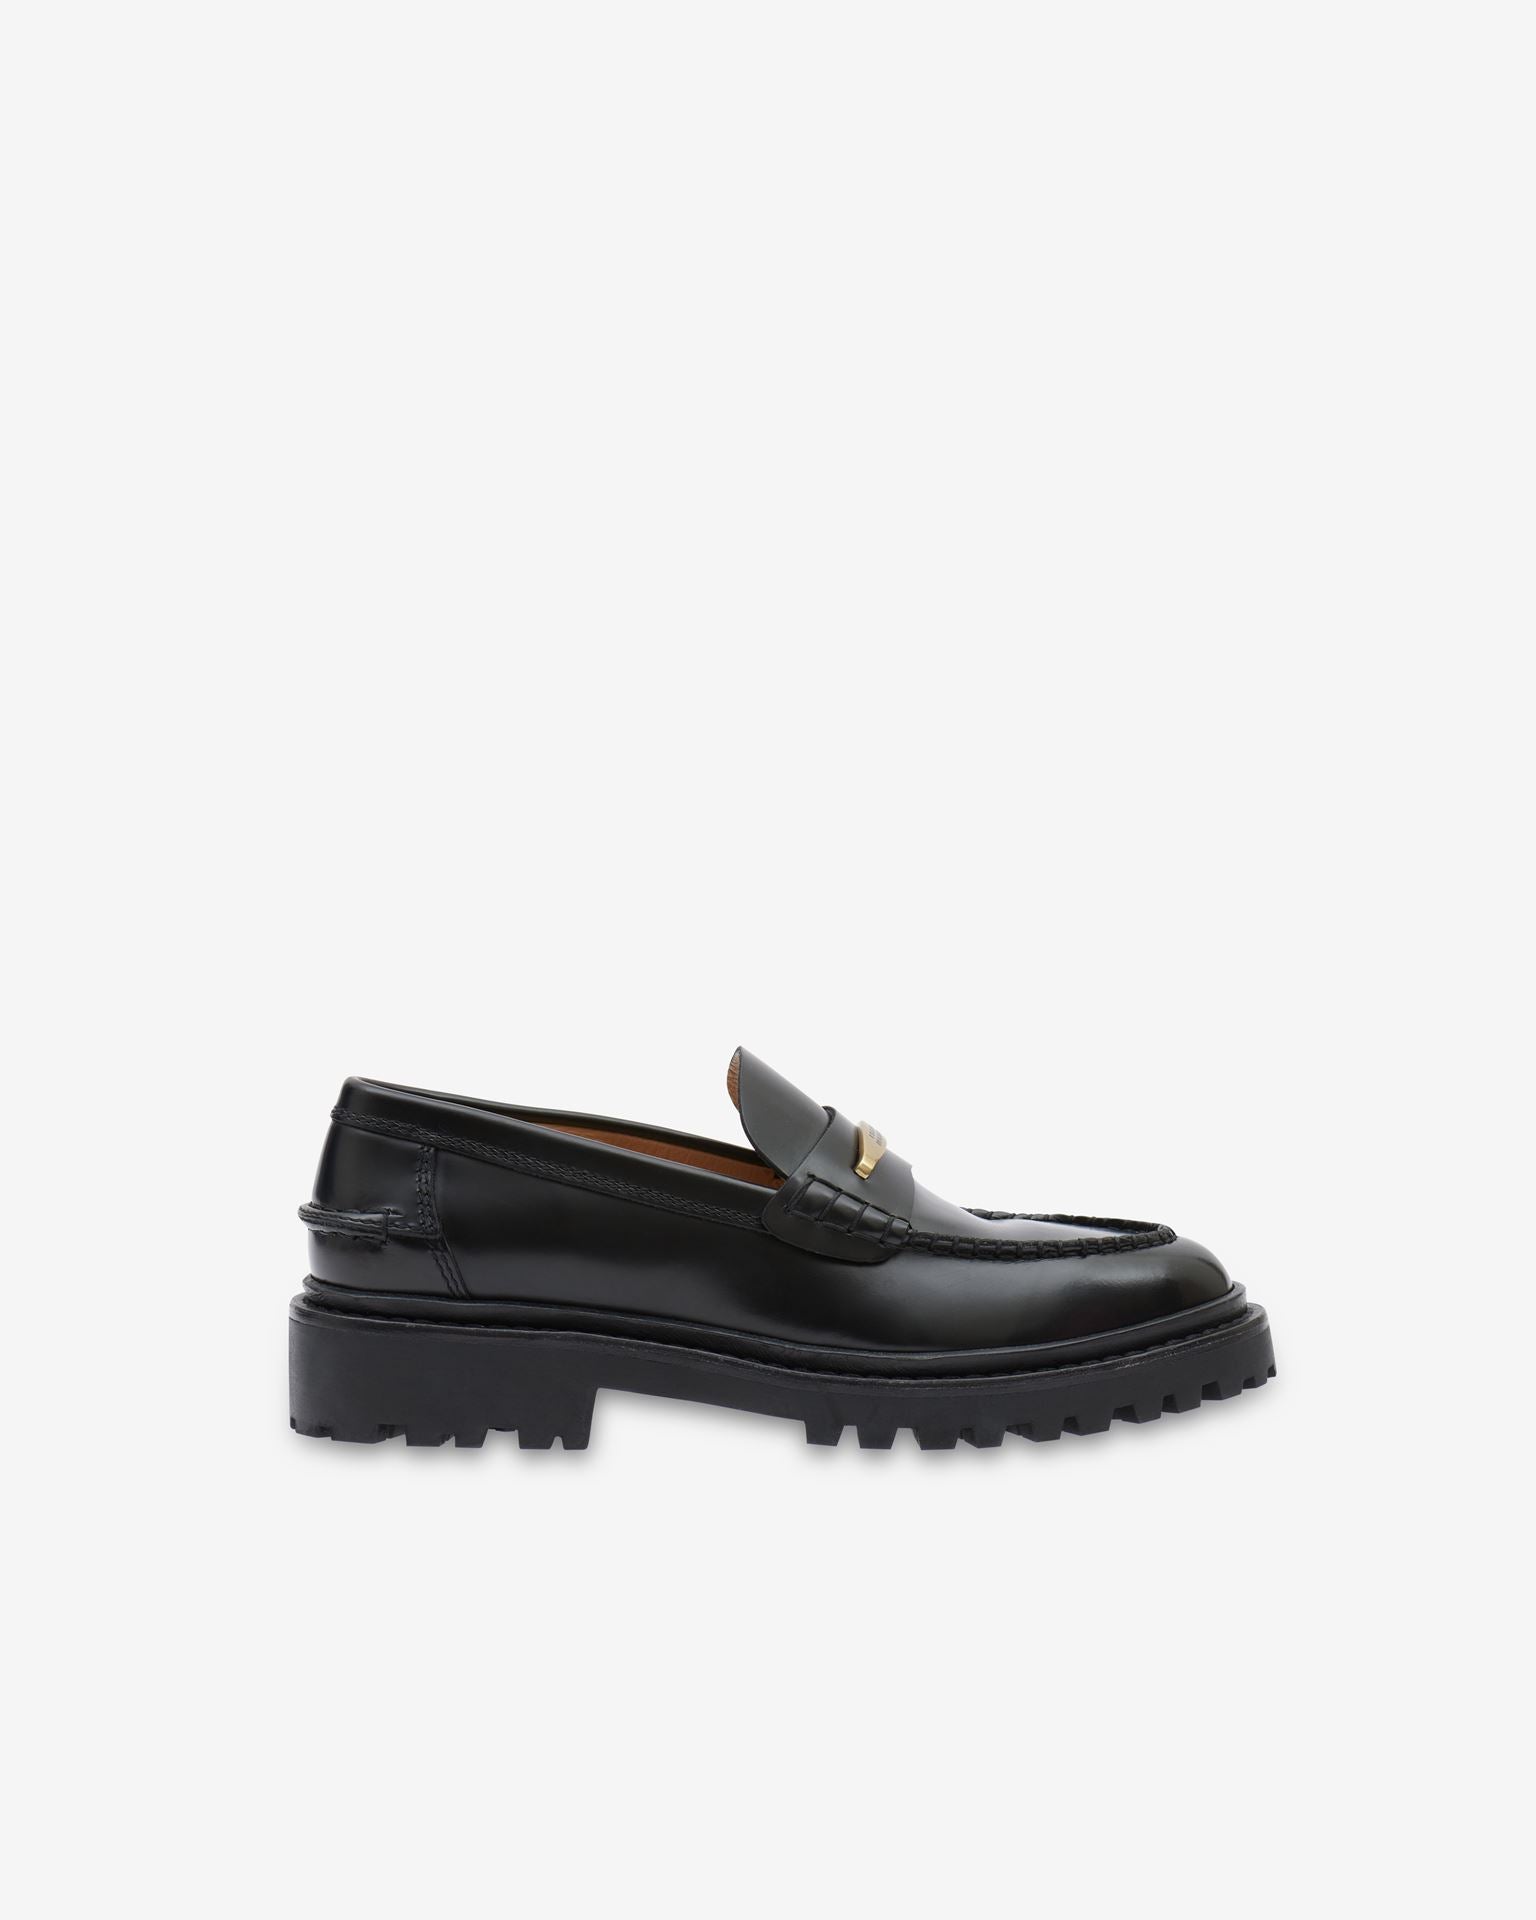 Isabel Marant Frezza Loafer-footwear-Misch-Vancouver-Canada